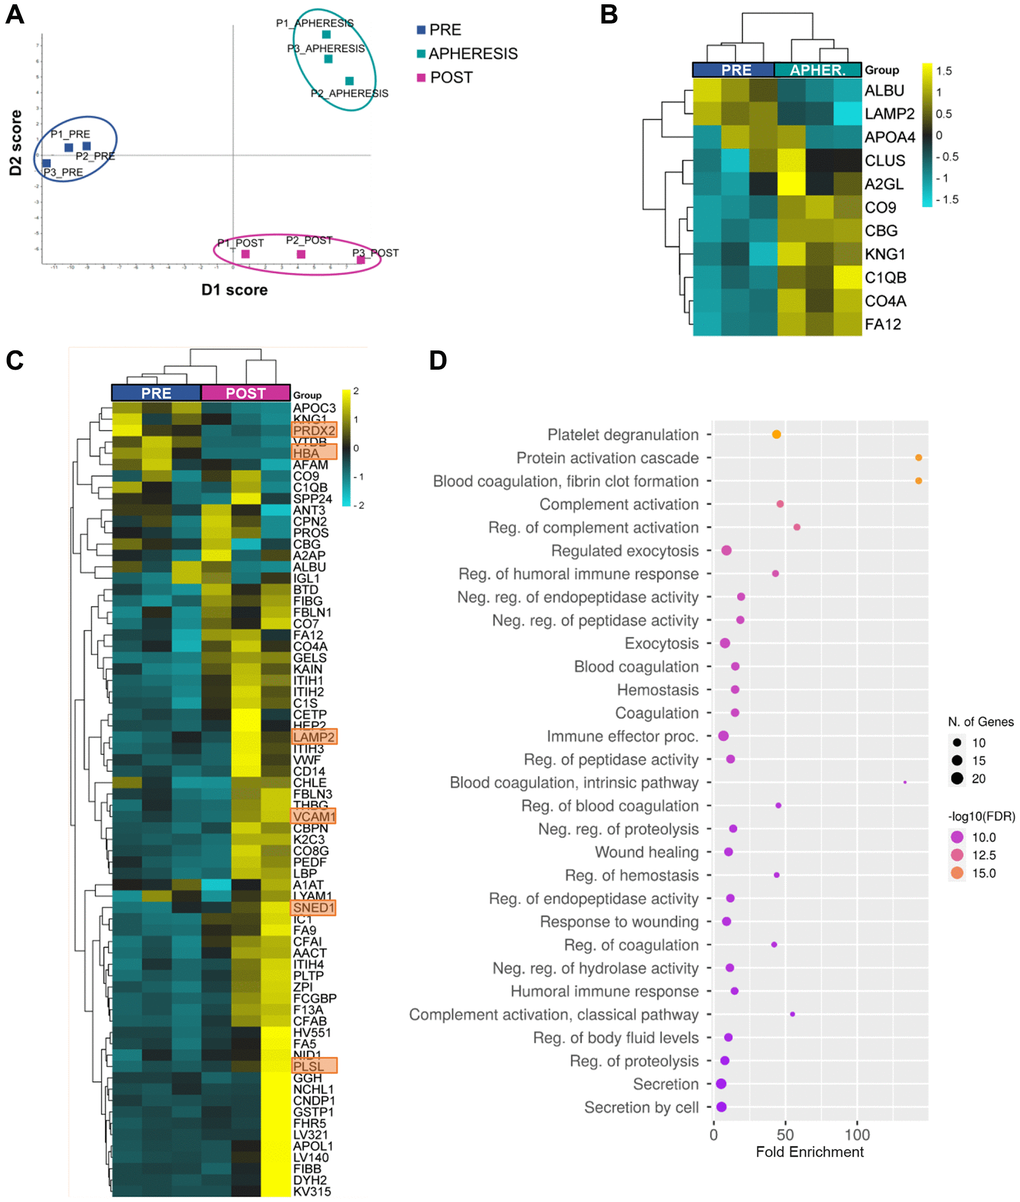 Plasma proteomic changes following autologous stem cell ovarian transplantation in patients with poor ovarian response. (A) Discriminant analysis plot considering the expression of the 296 quantified proteins, showing a clear separation between the PRE, APHERESIS, and POST samples. (B) Heatmaps depicting the hierarchical clustering of the 11 differentially expressed proteins (DEPs) between PRE and APHERESIS samples and (C) 70 DEPs between PRE and POST samples. The most prominent changes after ASCOT, considering the estimated fold change, highlighted in orange. Dot plot showing the top 30 significantly enriched (FDR D). The heatmaps are color coded according to protein expression determined by SWATH™ analysis, where yellow and turquoise indicate an increase or decrease in expression, respectively.